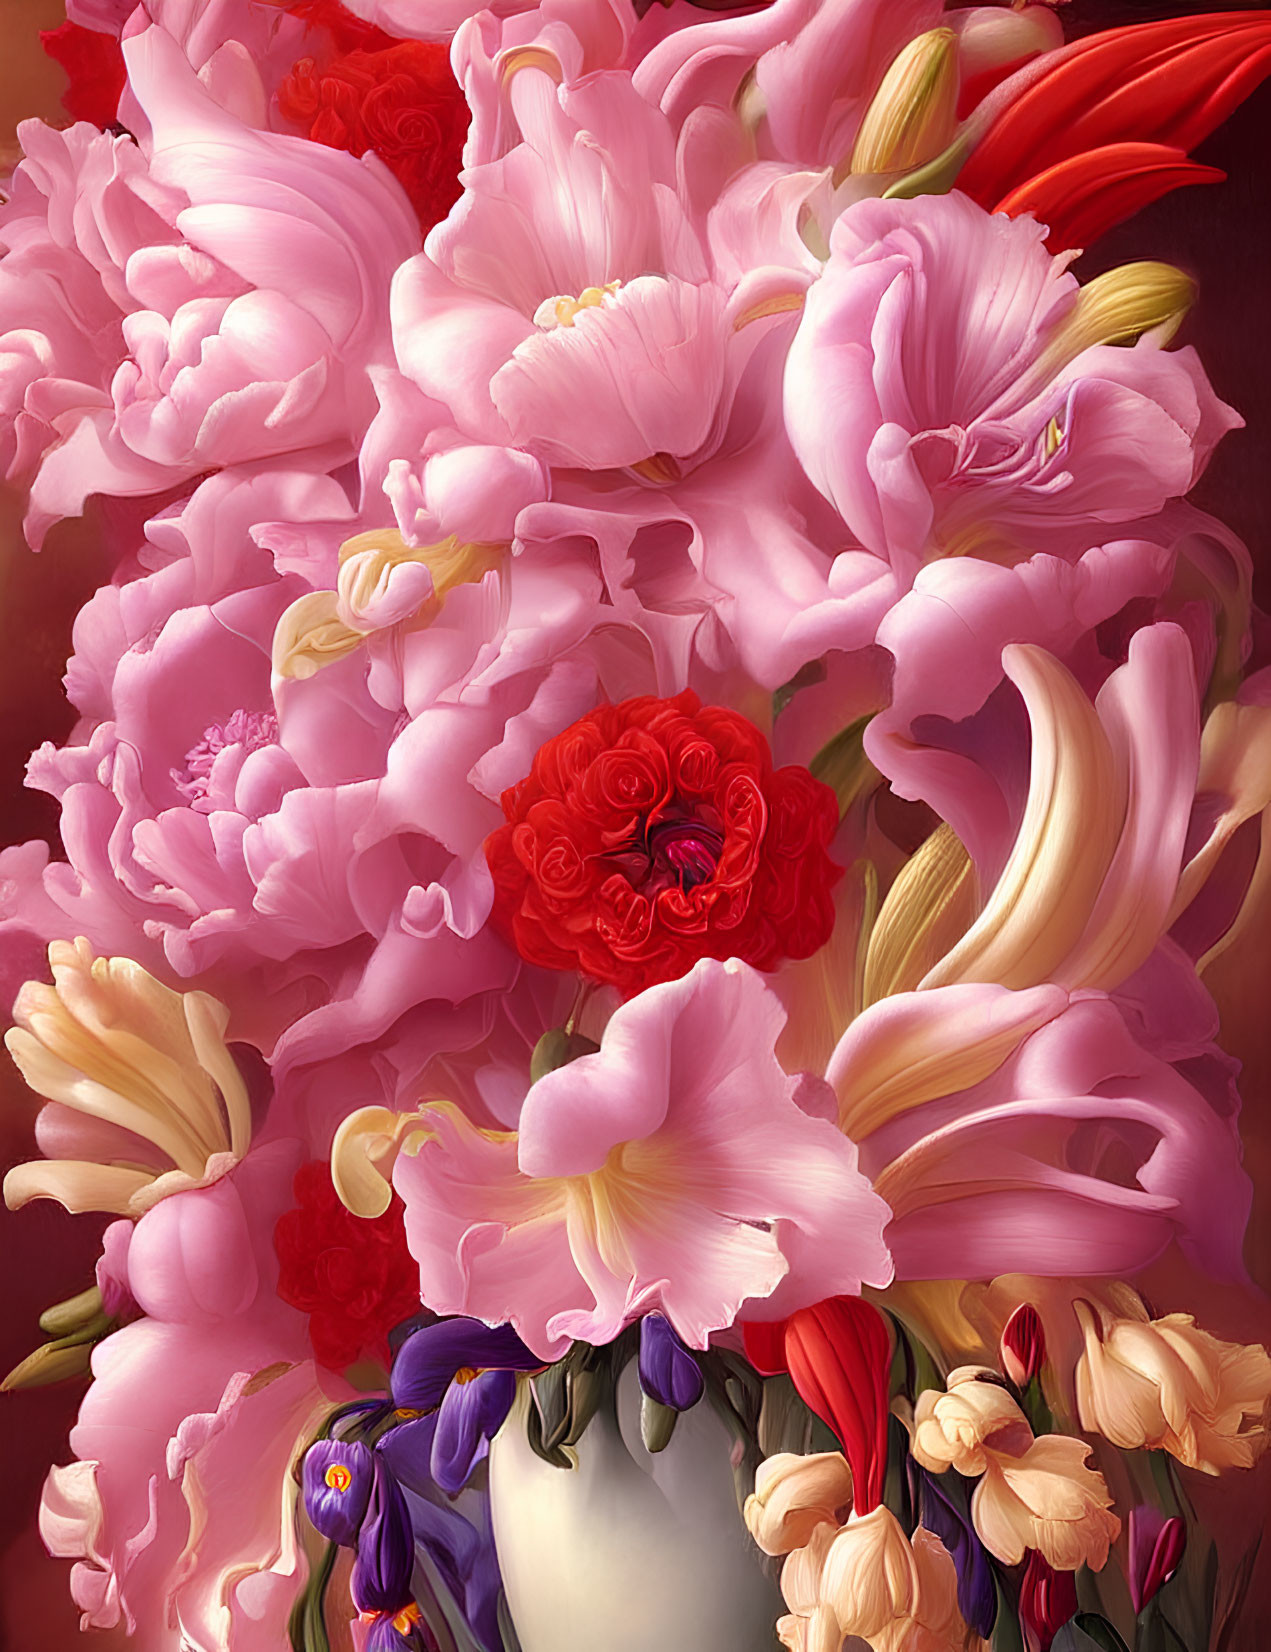 Colorful Pink and Red Floral Arrangement in White Vase on Dark Background